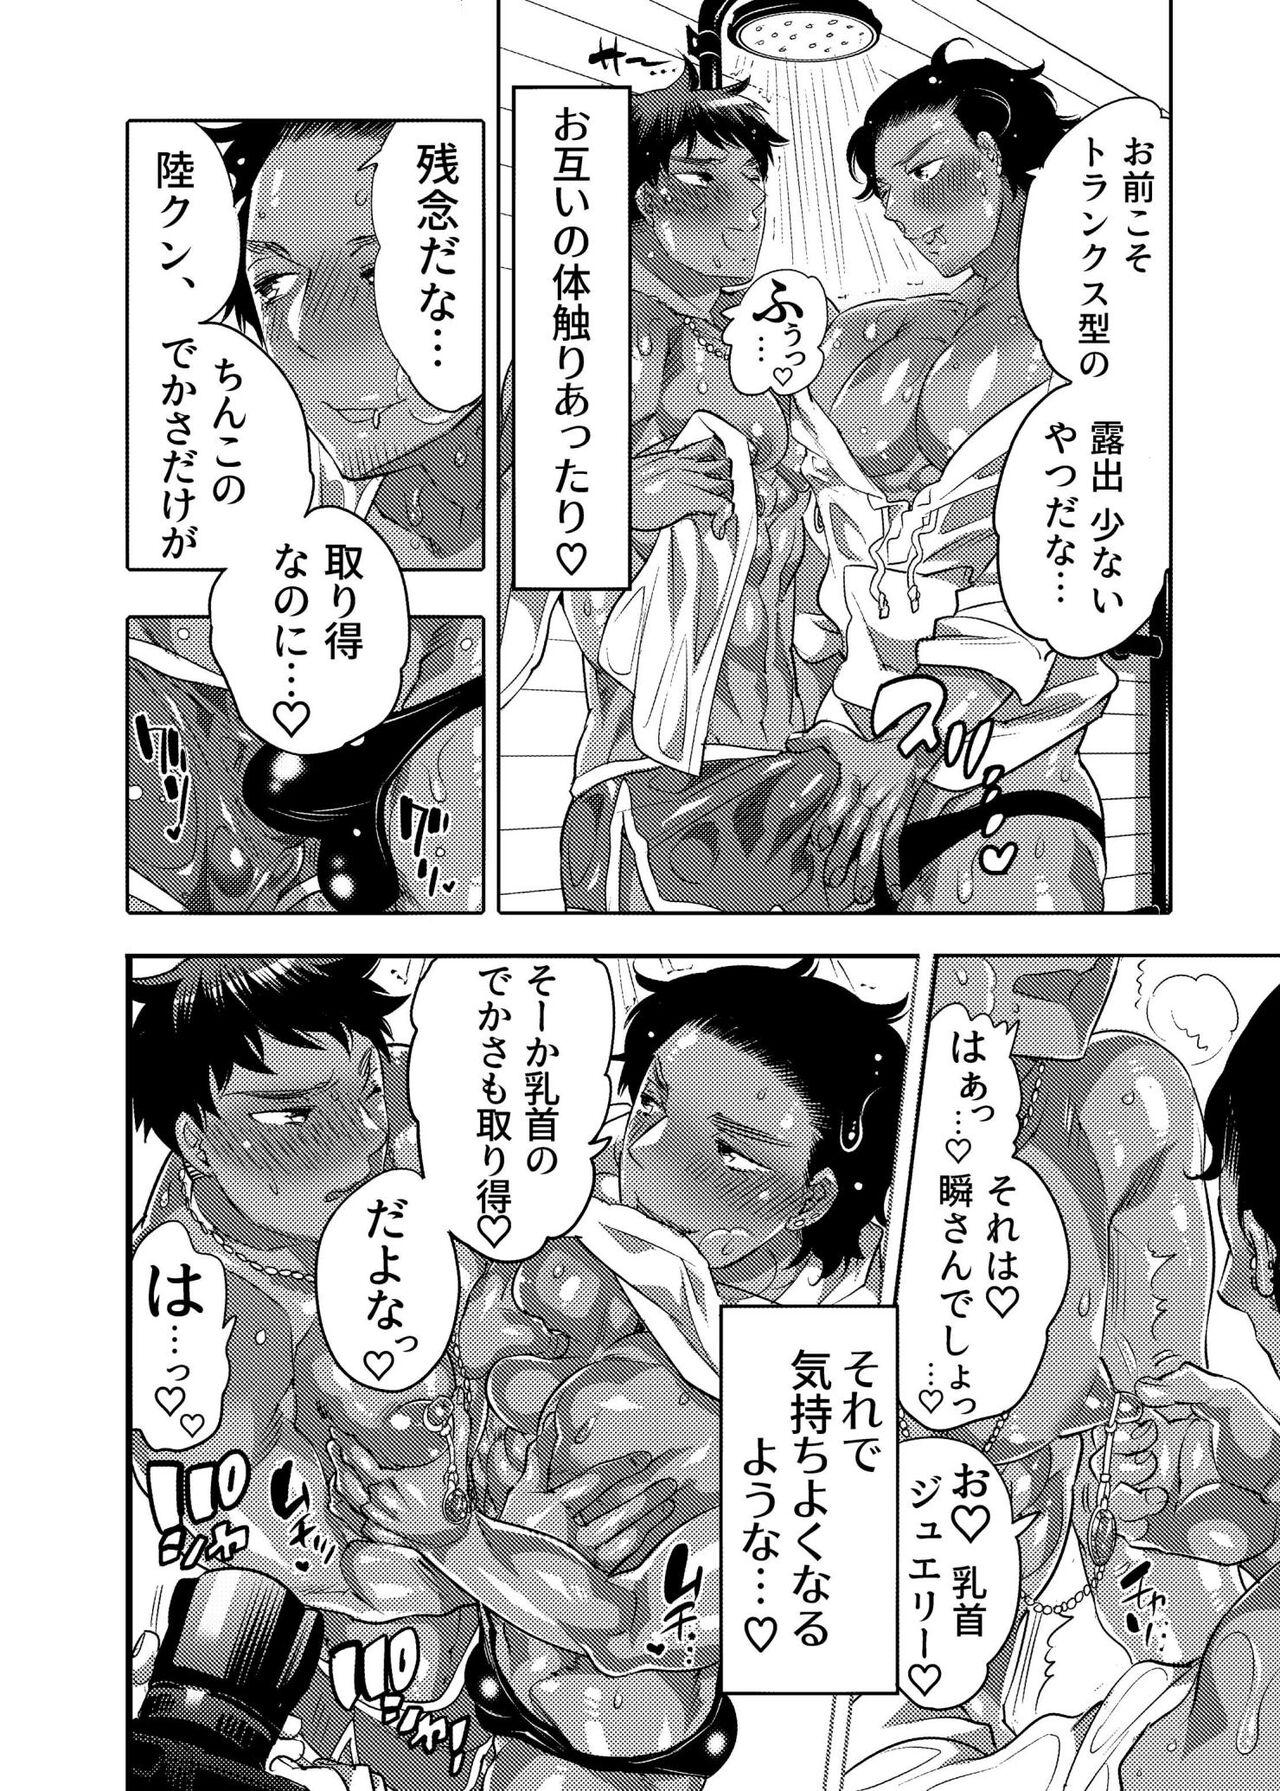 Tattoo Ana Mise Model-kun Guerrilla Satsueichuu Gay 3some - Page 5